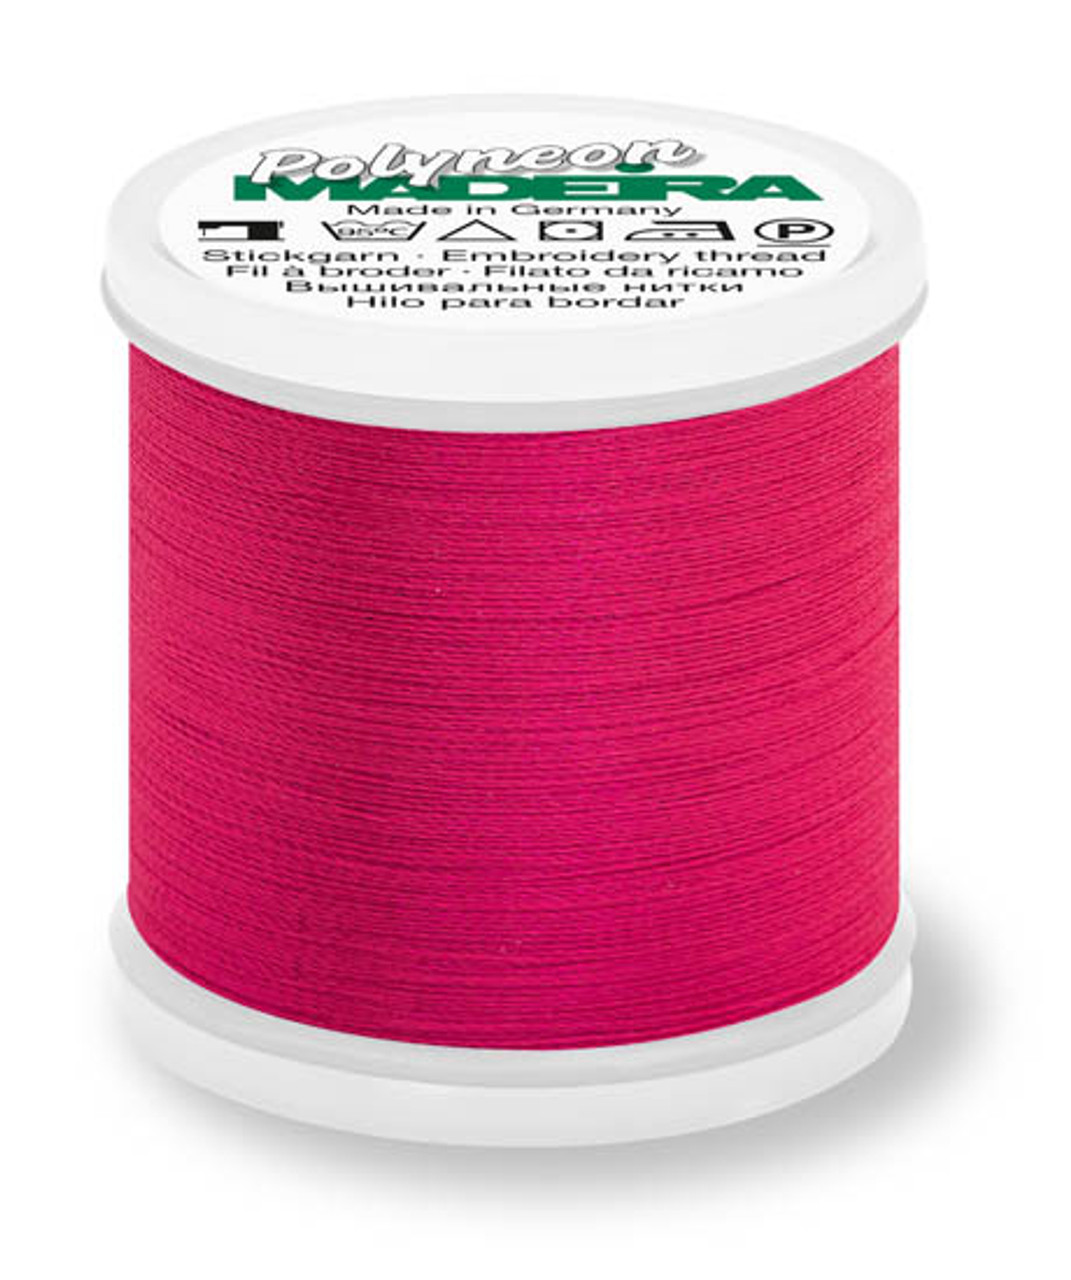 Madeira #40 PolyNeon Polyester Embroidery Thread, #1595 Fluorescent Pink,  5500 yd